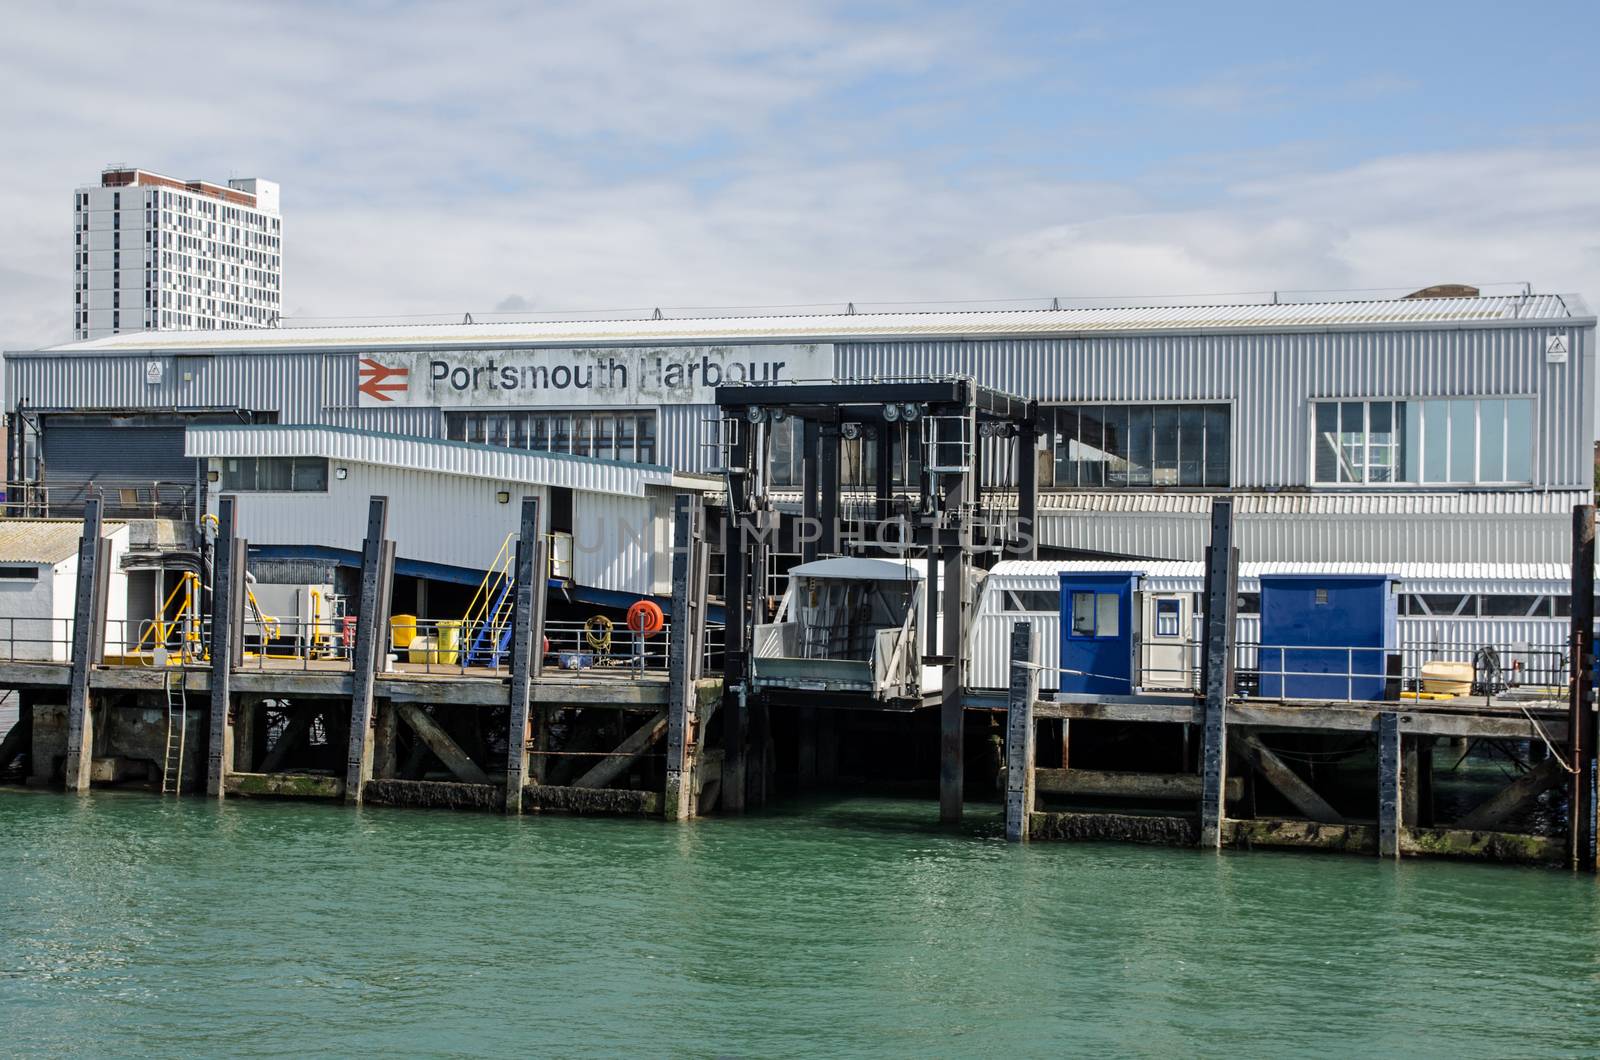 Portsmouth, UK - September 8, 2020: View from the sea of the exterior of Portsmouth Harbour railway station which allows train passengers to transfer straight to ferries to the Isle of Wight and Gosport.  